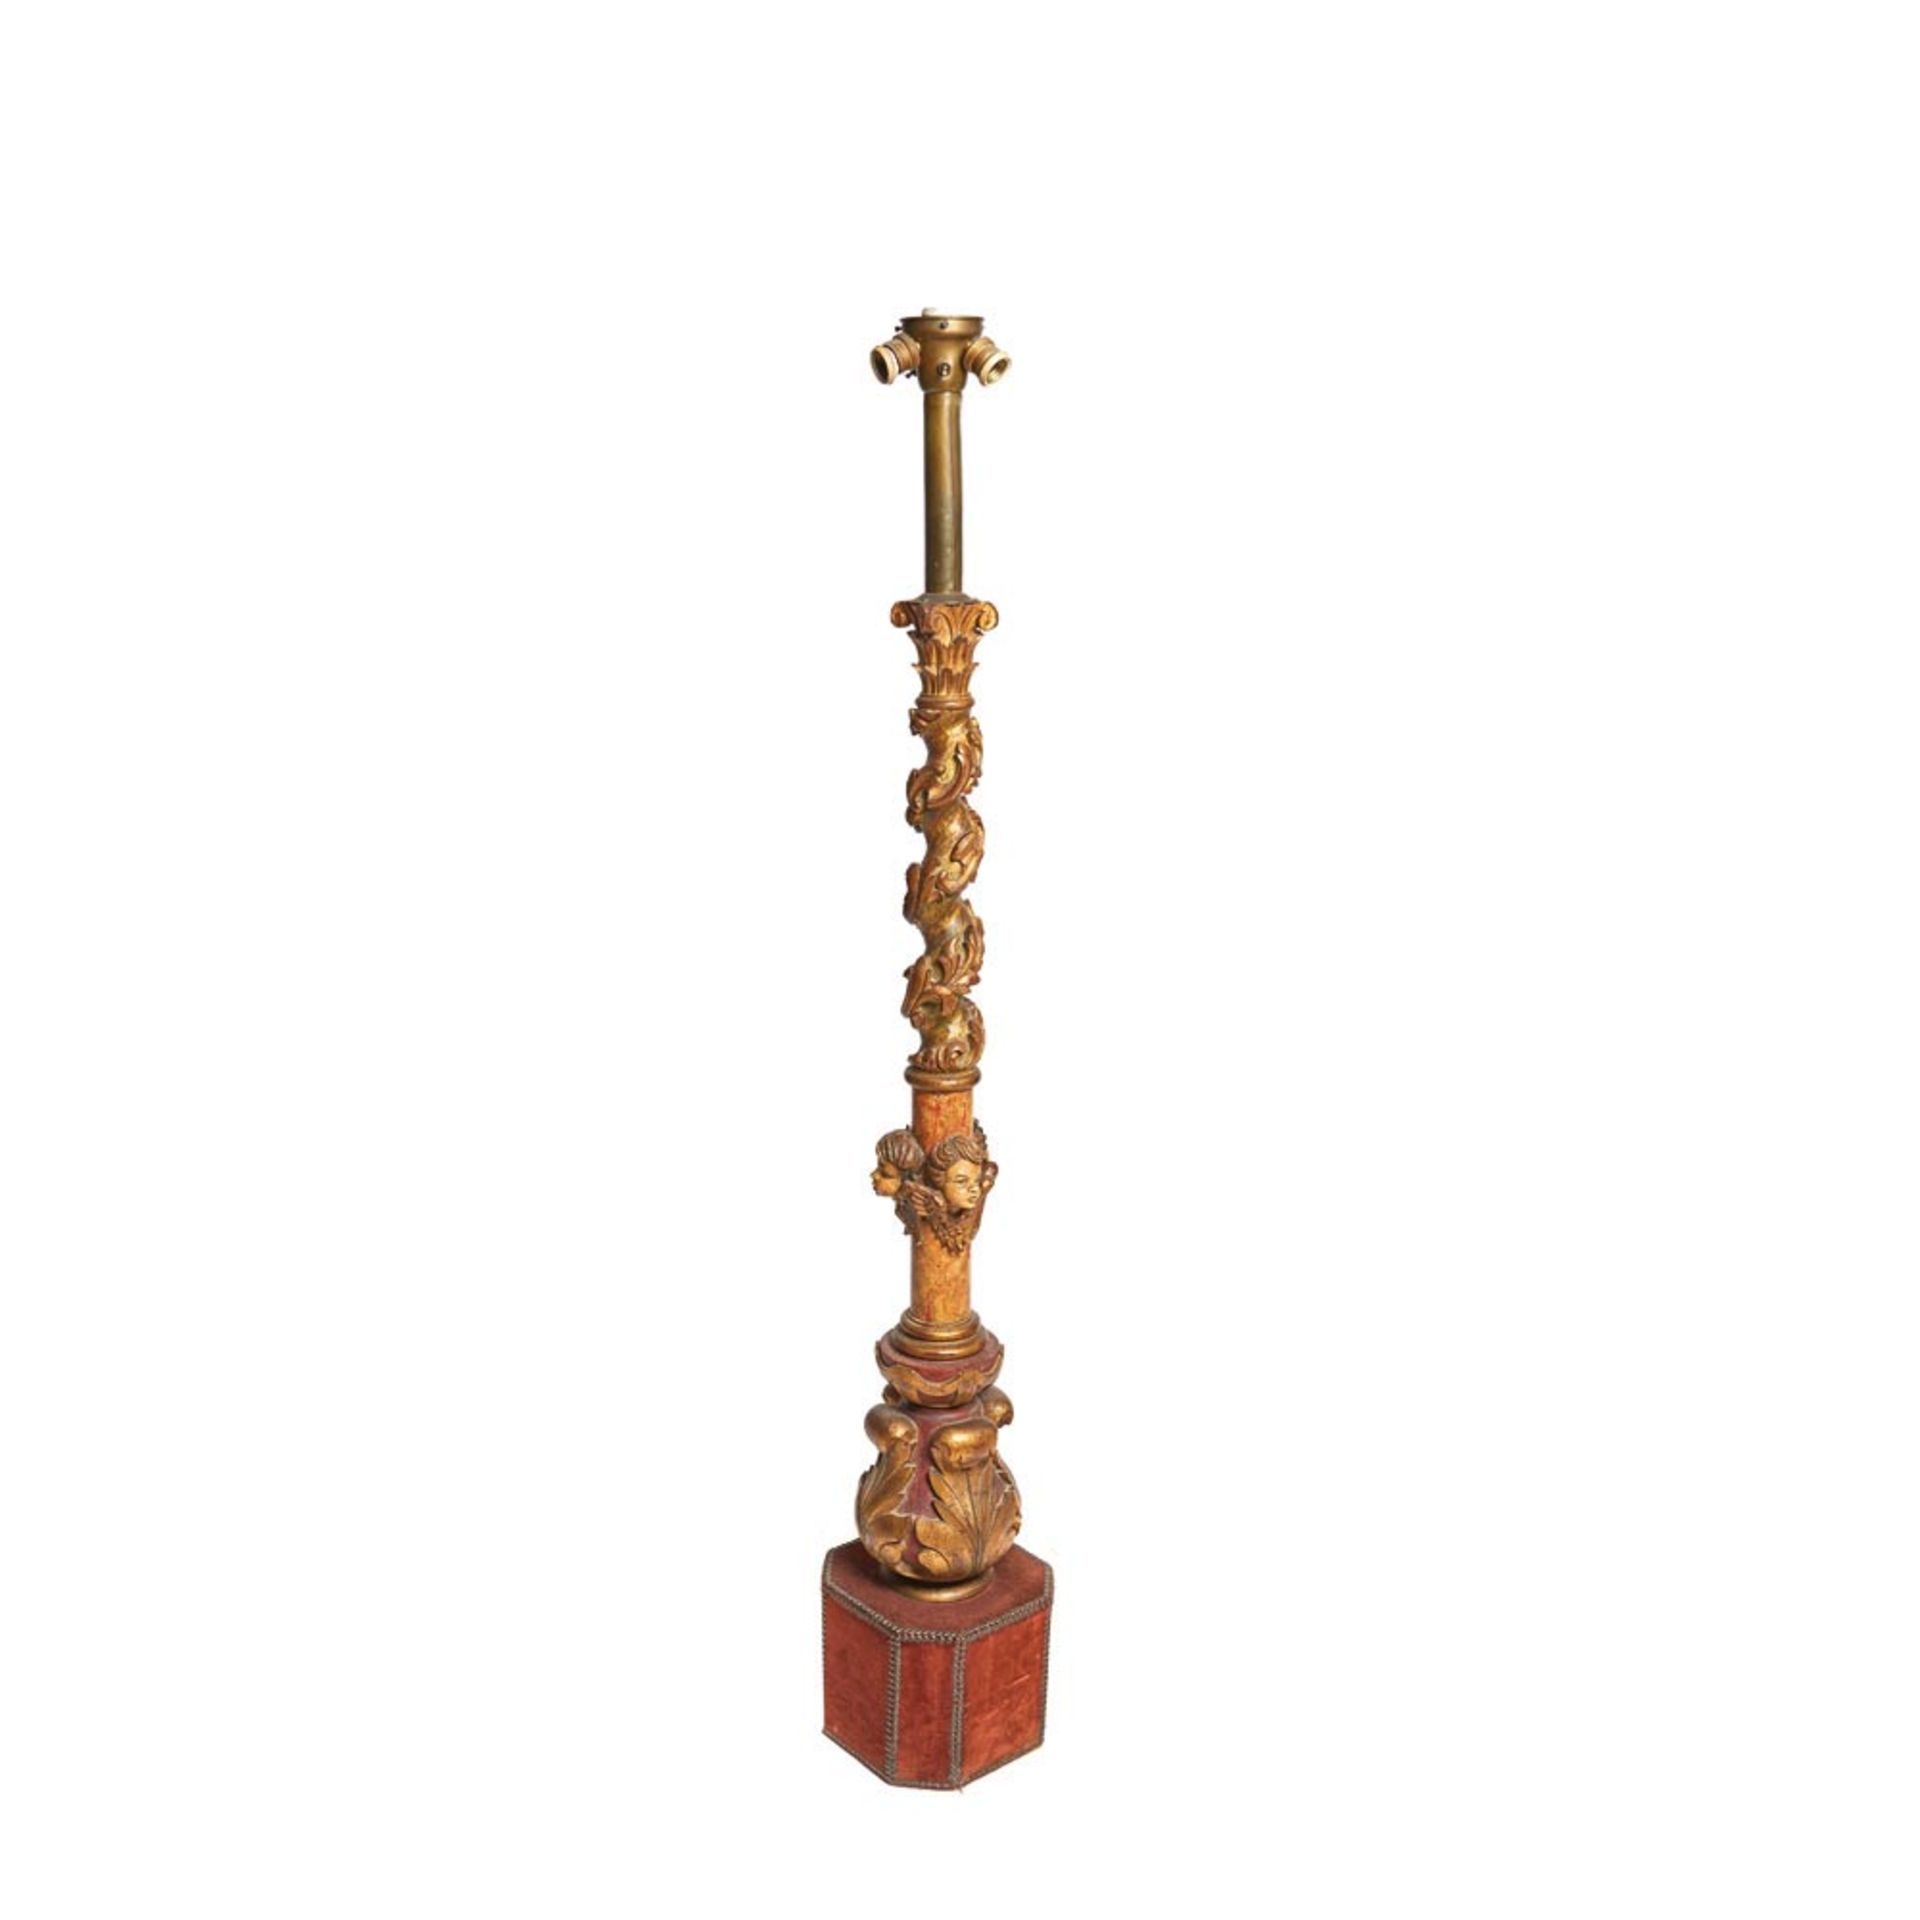 Carved, polychrome and gilt wood standing lamp